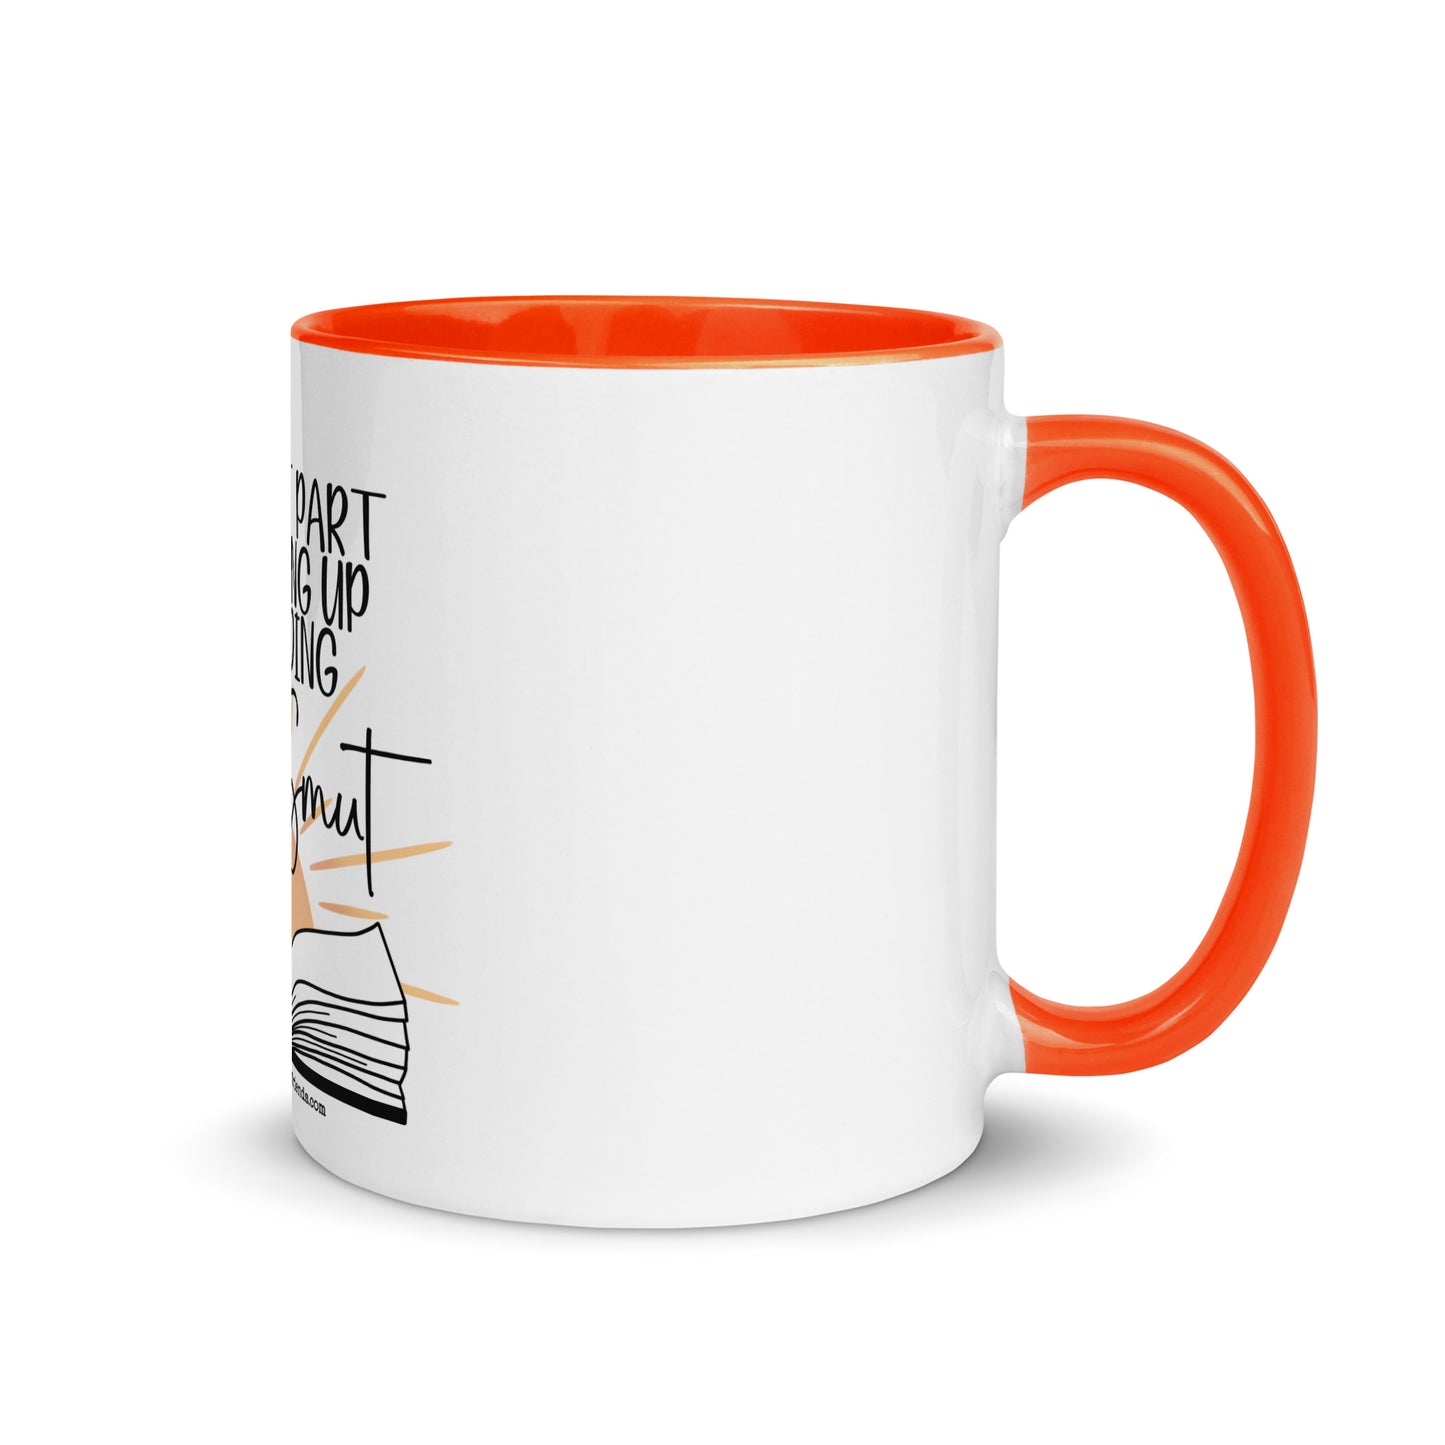 Best Part of Waking Up Mug with Color Inside